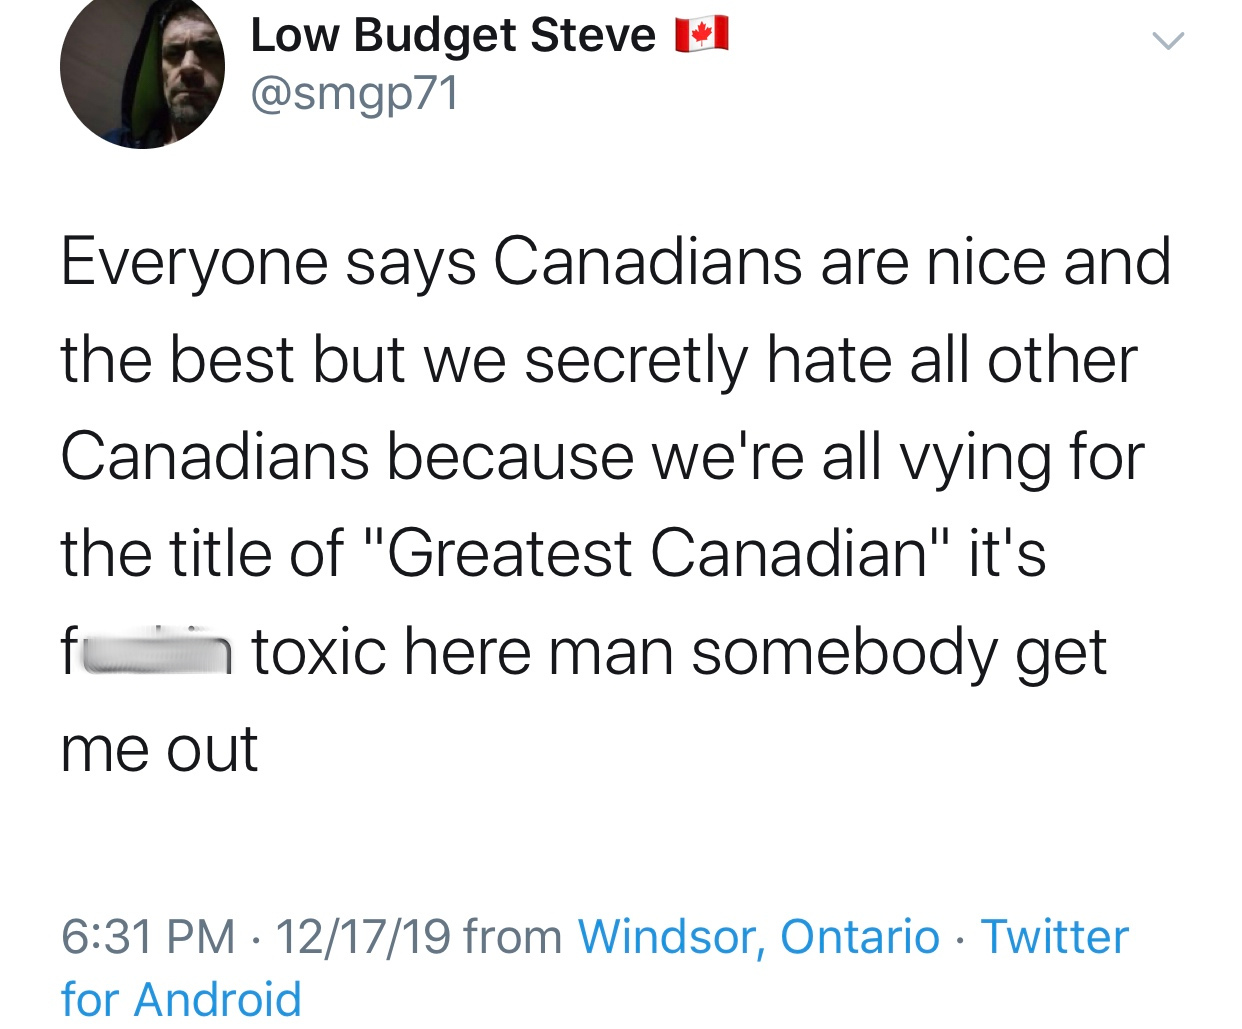 Project - Low Budget Steve I Everyone says Canadians are nice and the best but we secretly hate all other Canadians because we're all vying for the title of "Greatest Canadian" it's fotoxic here man somebody get me out 121719 from Windsor, Ontario Twitter